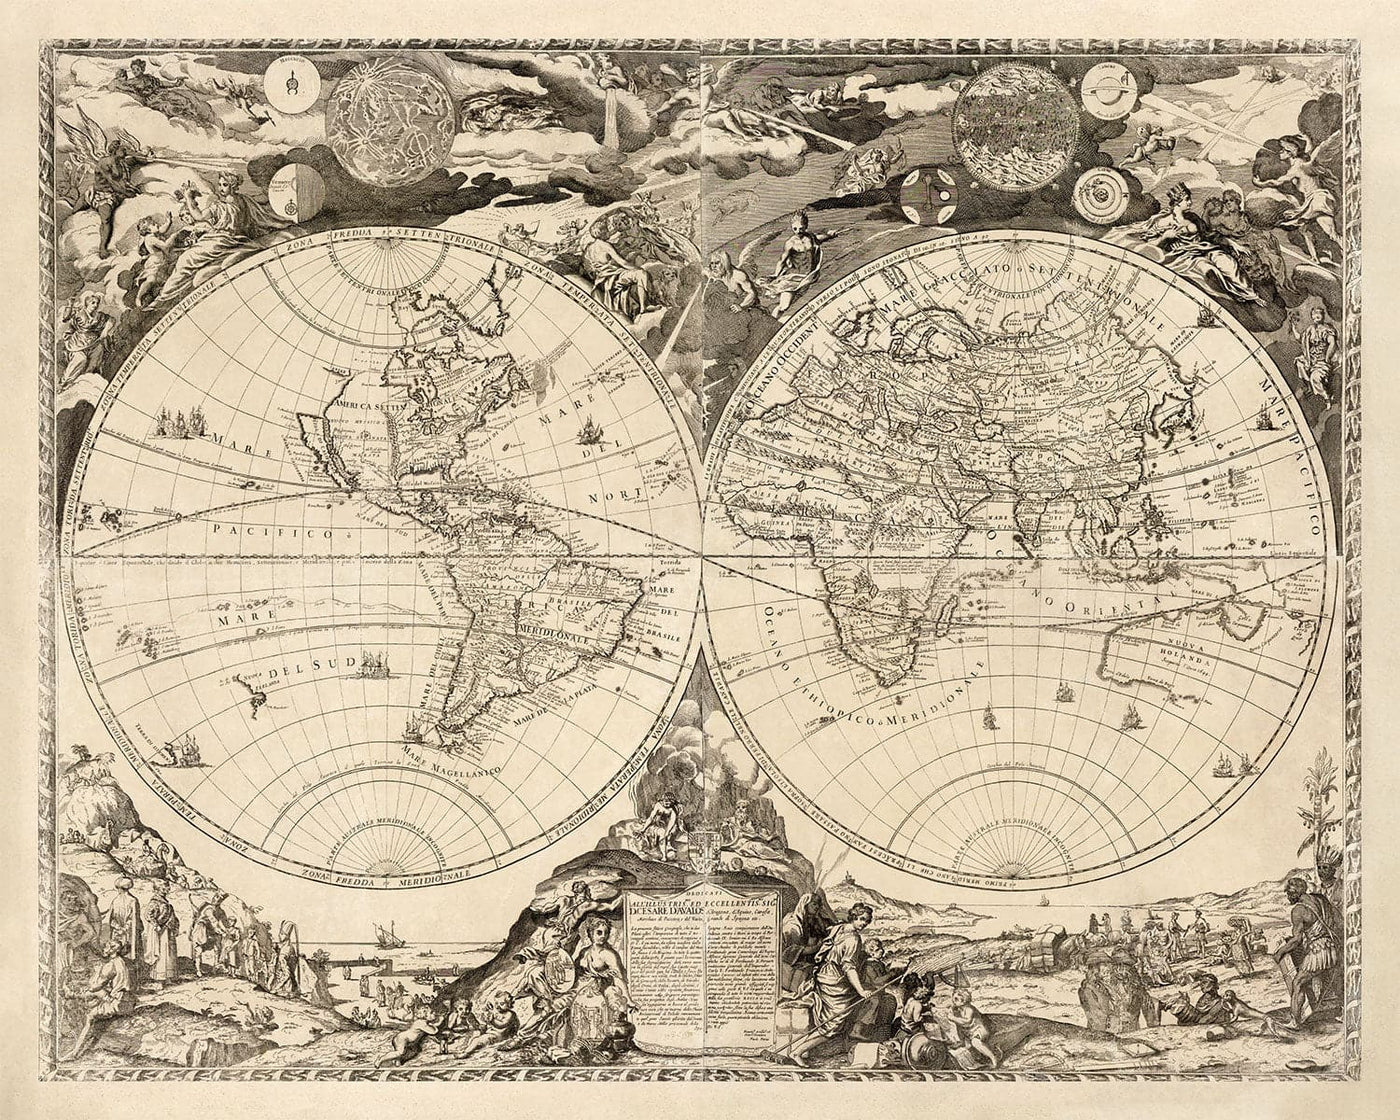 Old World Map, 1700 - Rare Monochrome Antique Atlas Map, Vintage Wall Art by Paolo Petrini